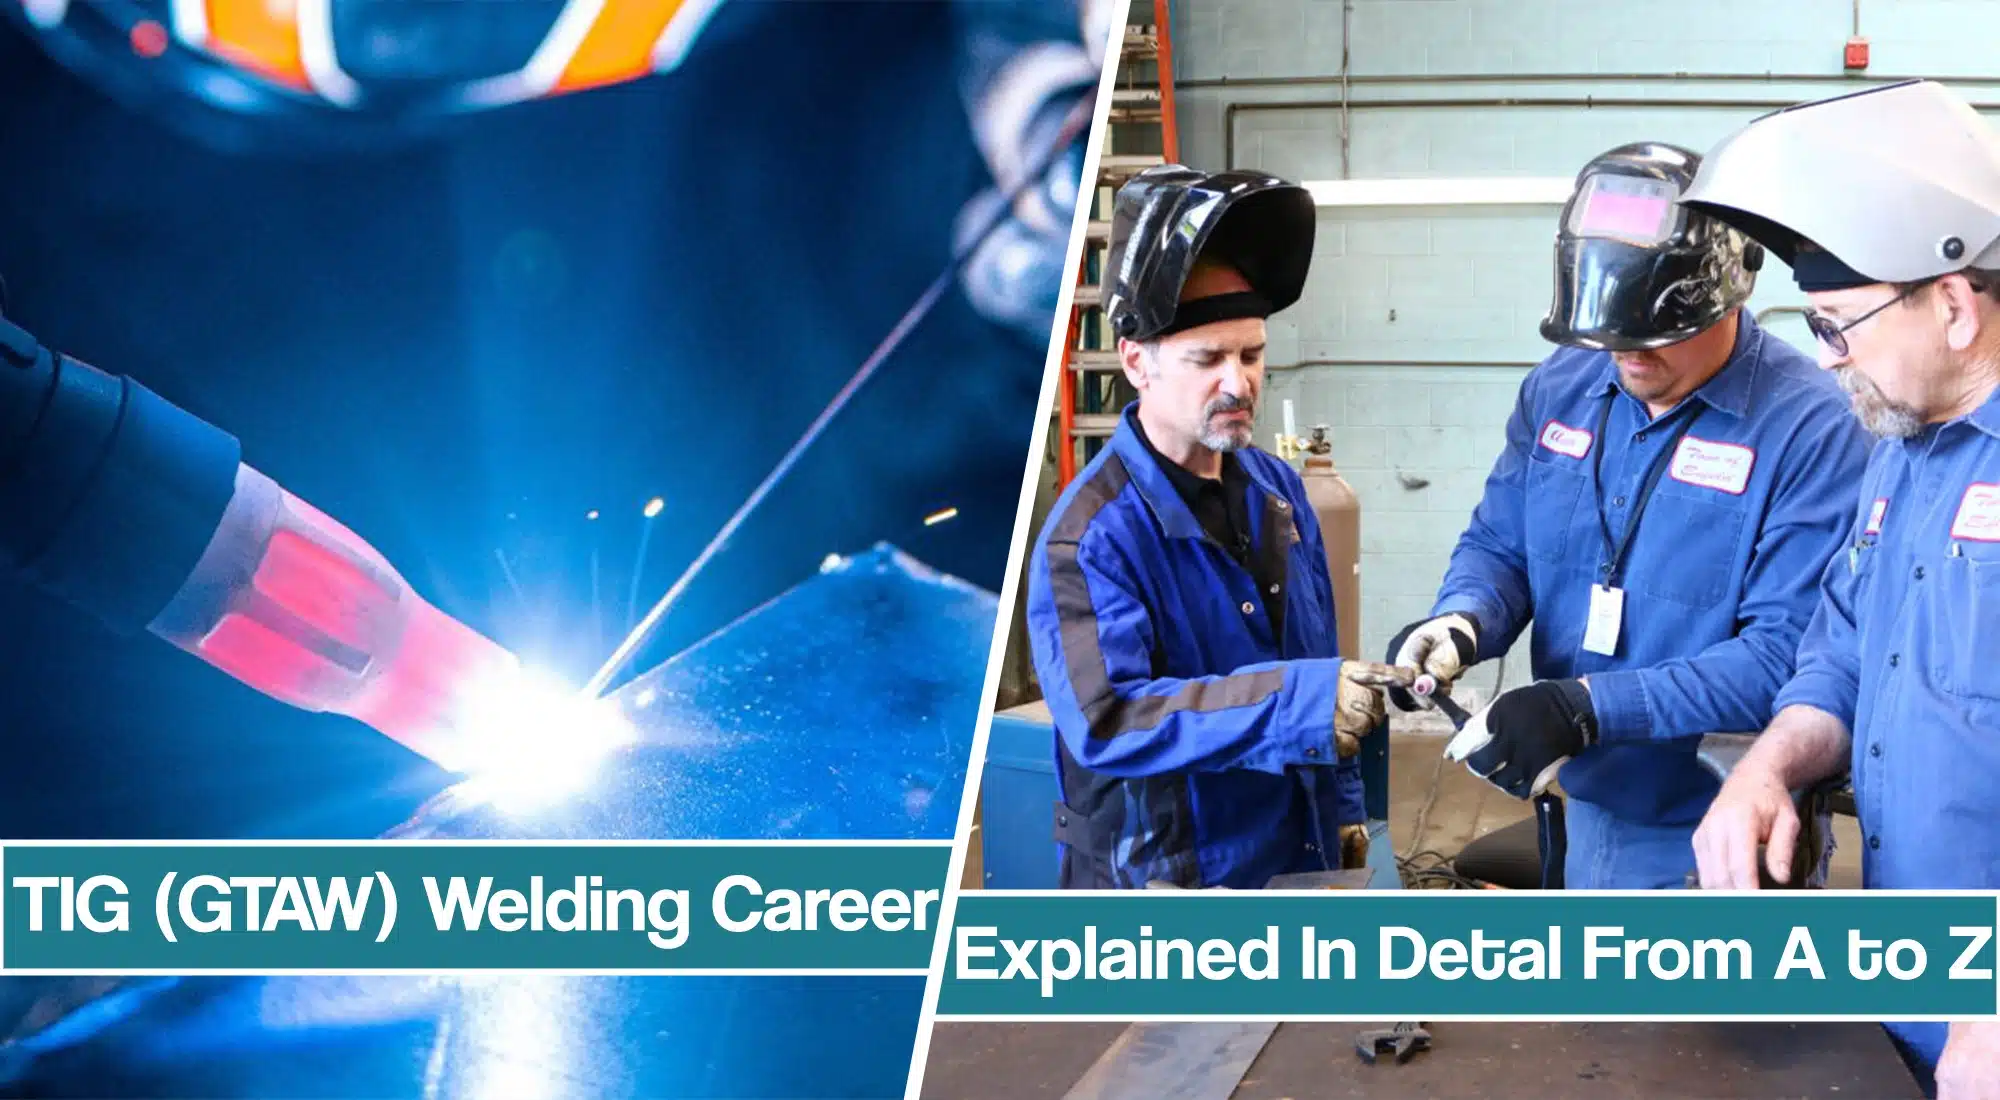 TIG Welding Career From A to Z